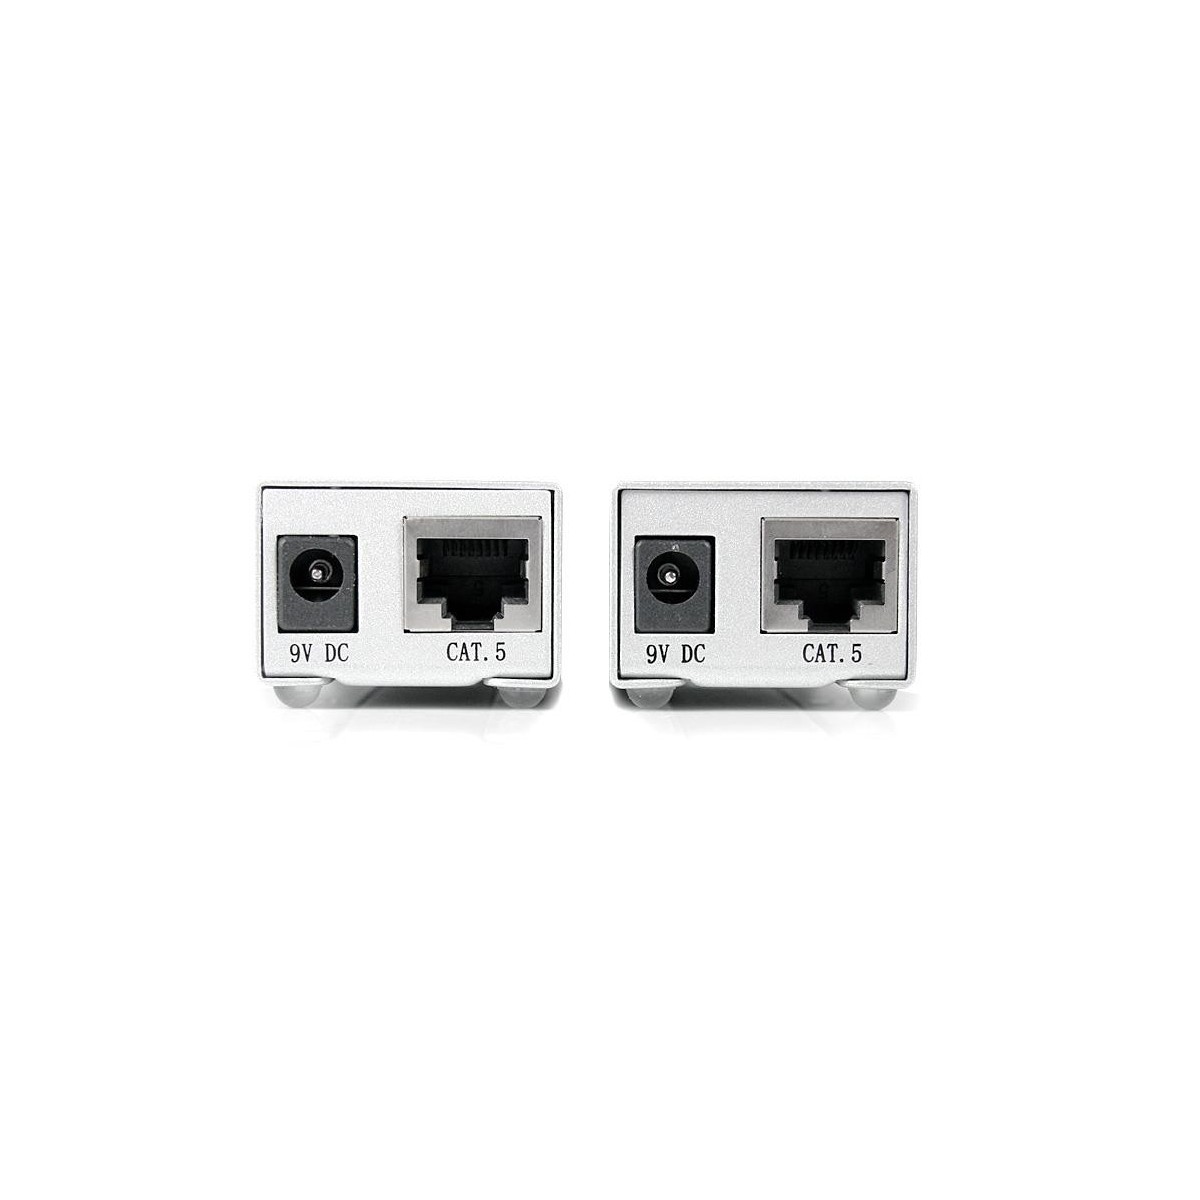 StarTech.com Serial DB9 RS232 Extender over Cat 5 - Up to 3300 ft (1000 meters) - VGA - Serial - RS-232 - Silver - DC - 0 - 70 °